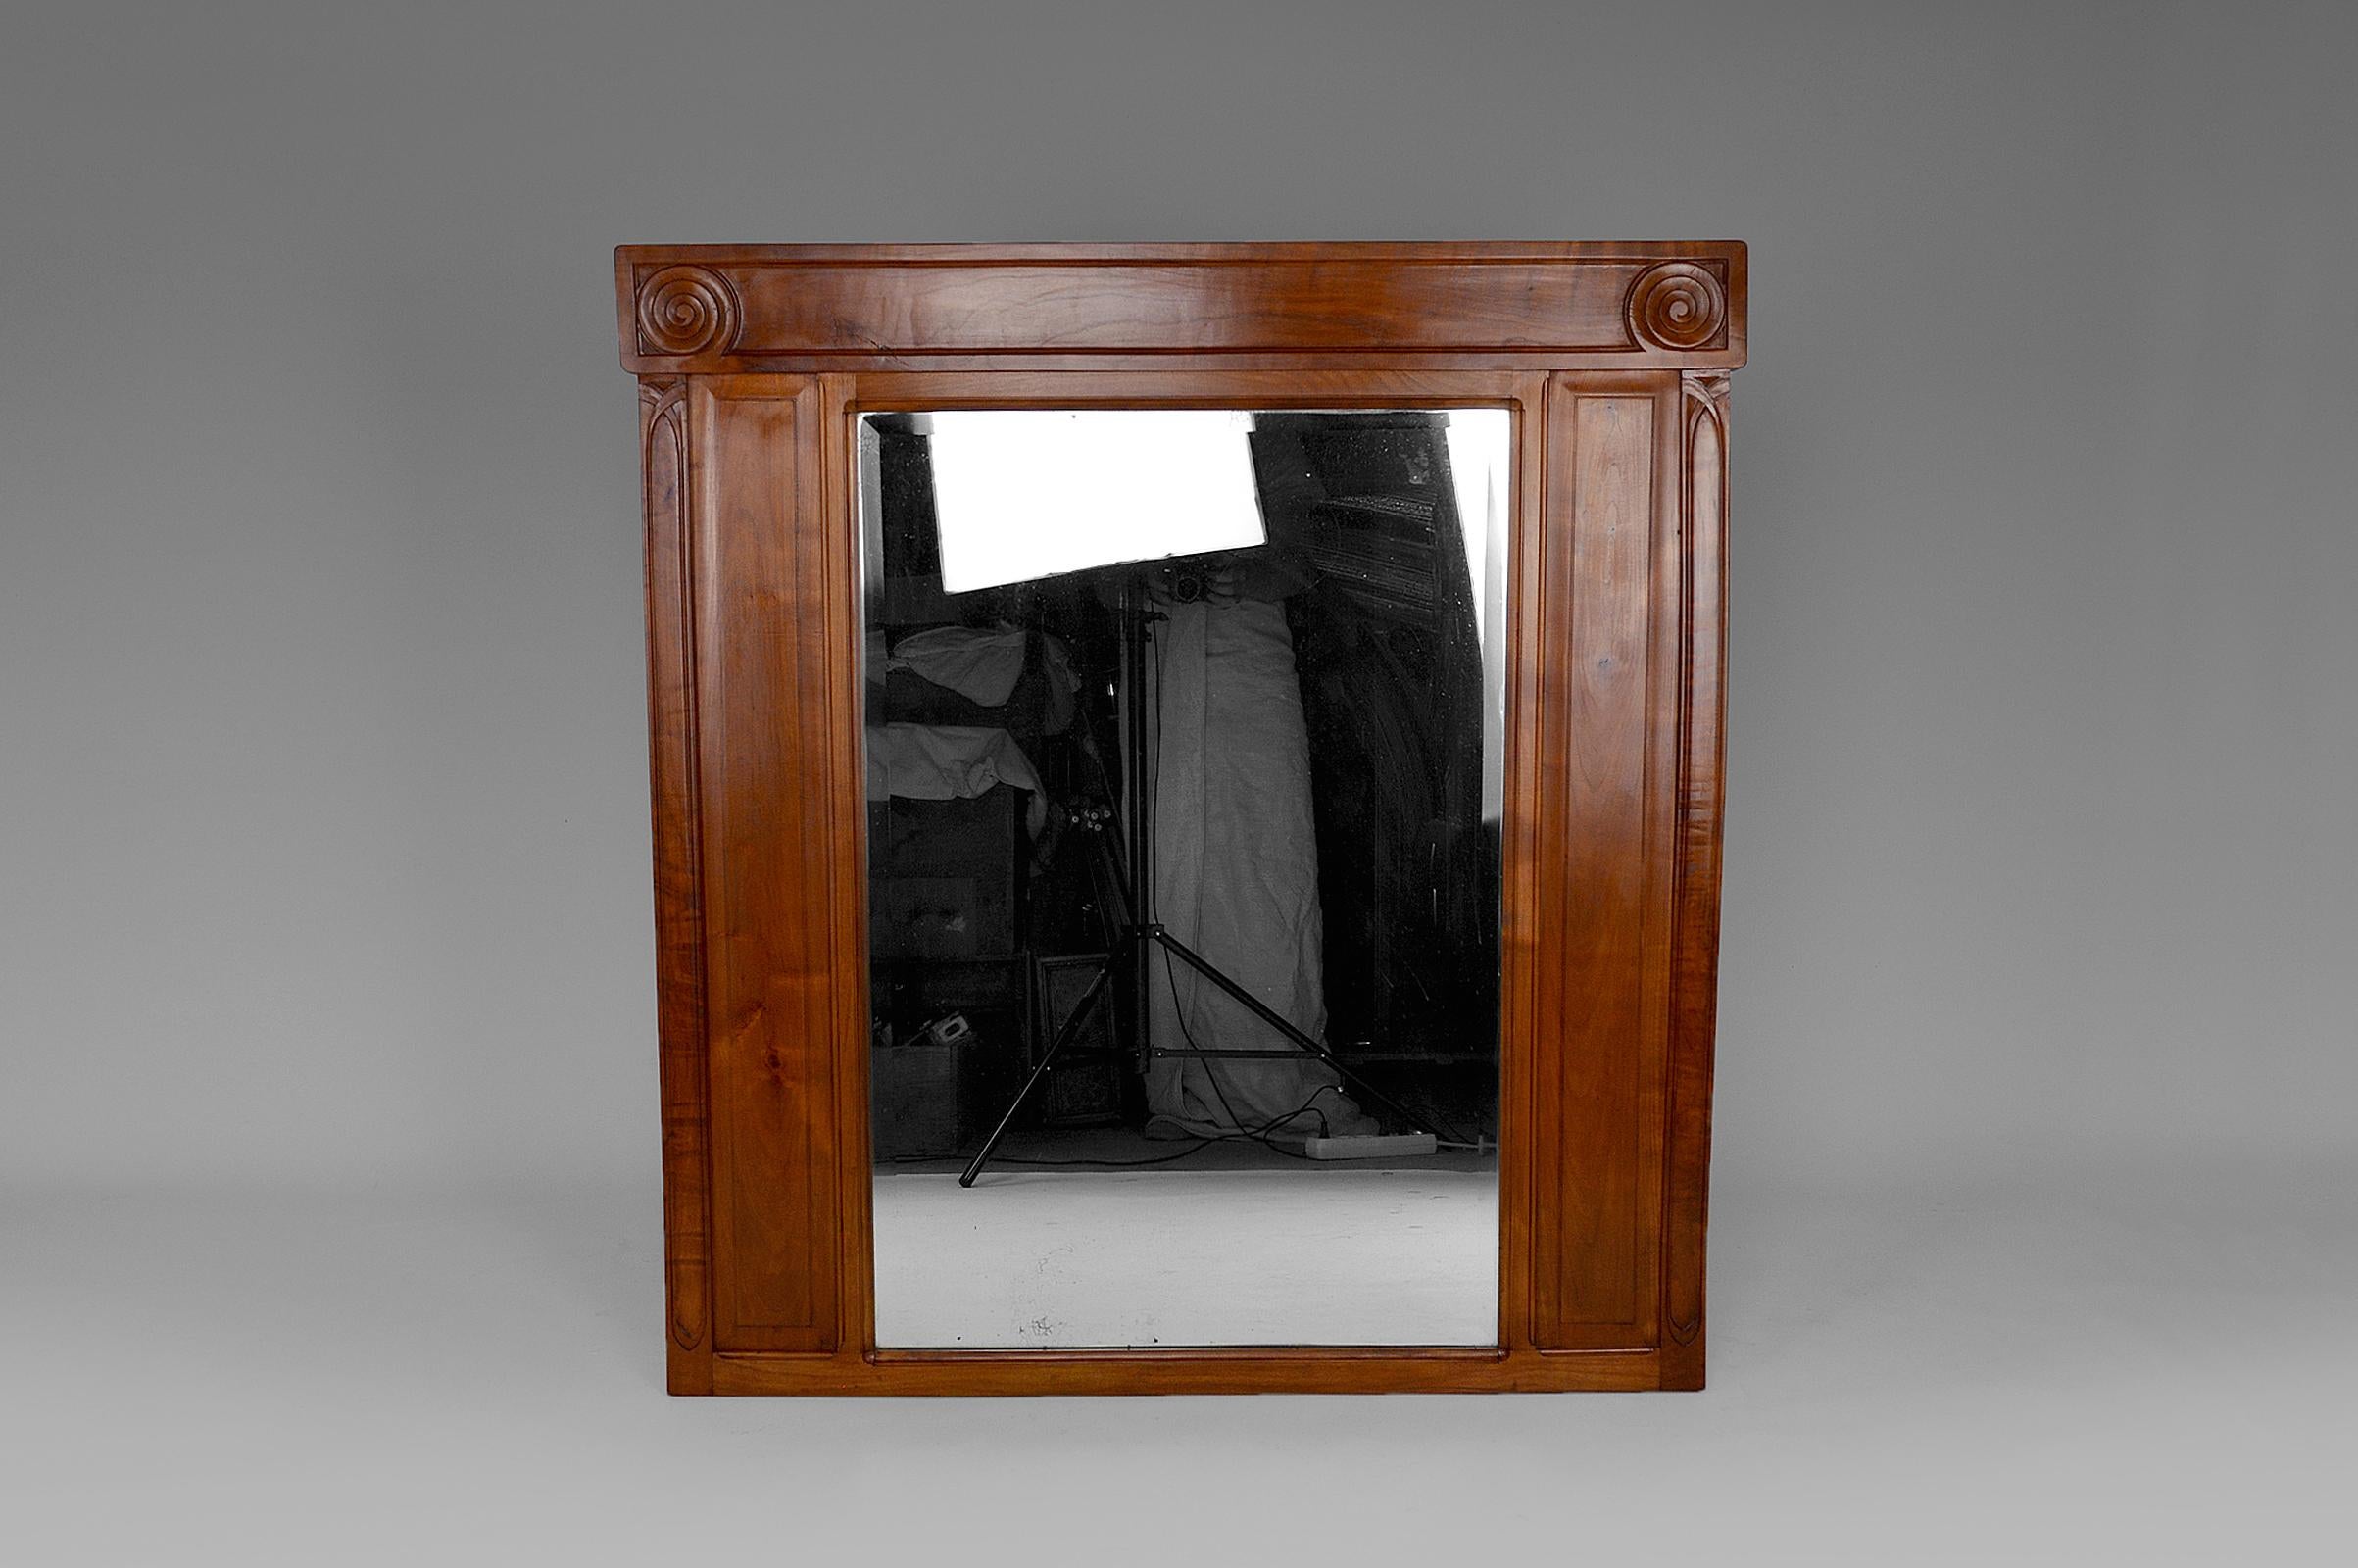 Overmantel mirror in carved cherry wood and beveled mirror.

Art Nouveau, France, circa 1910.
By the Toulouse cabinetmaker Maurice Alet, creator of the La Ruche Workshop.

In excellent condition, restored frame: stripping, treatment against